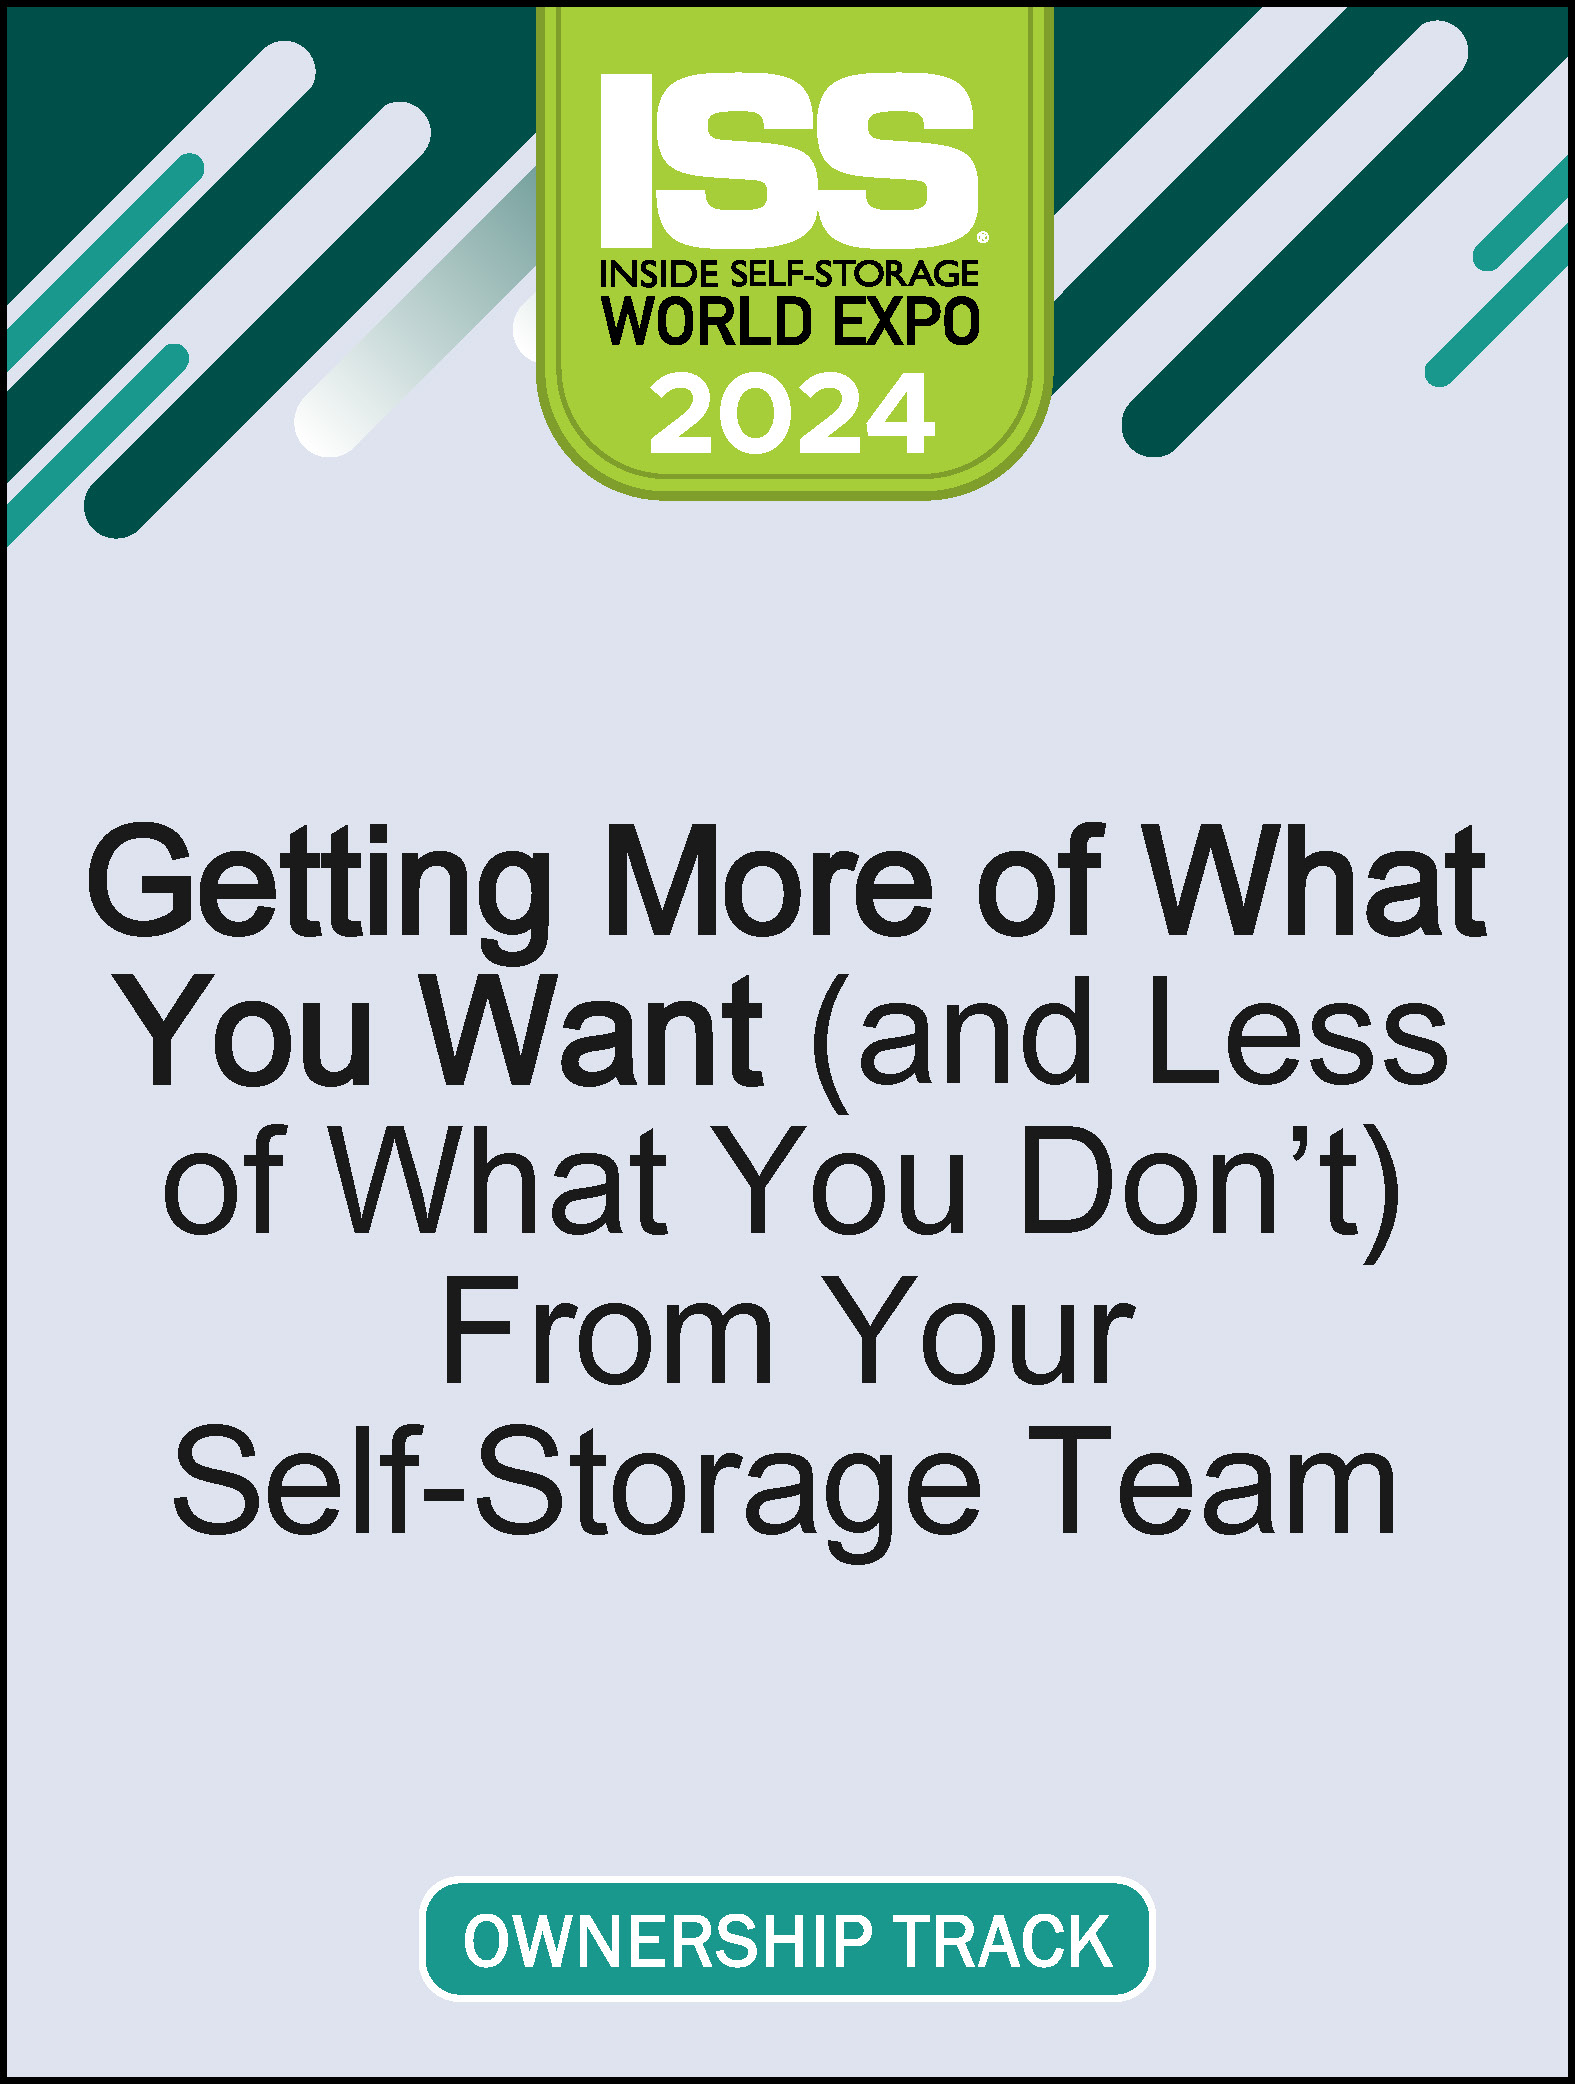 Video Pre-Order PDF - Getting More of What You Want (and Less of What You Don’t) From Your Self-Storage Team